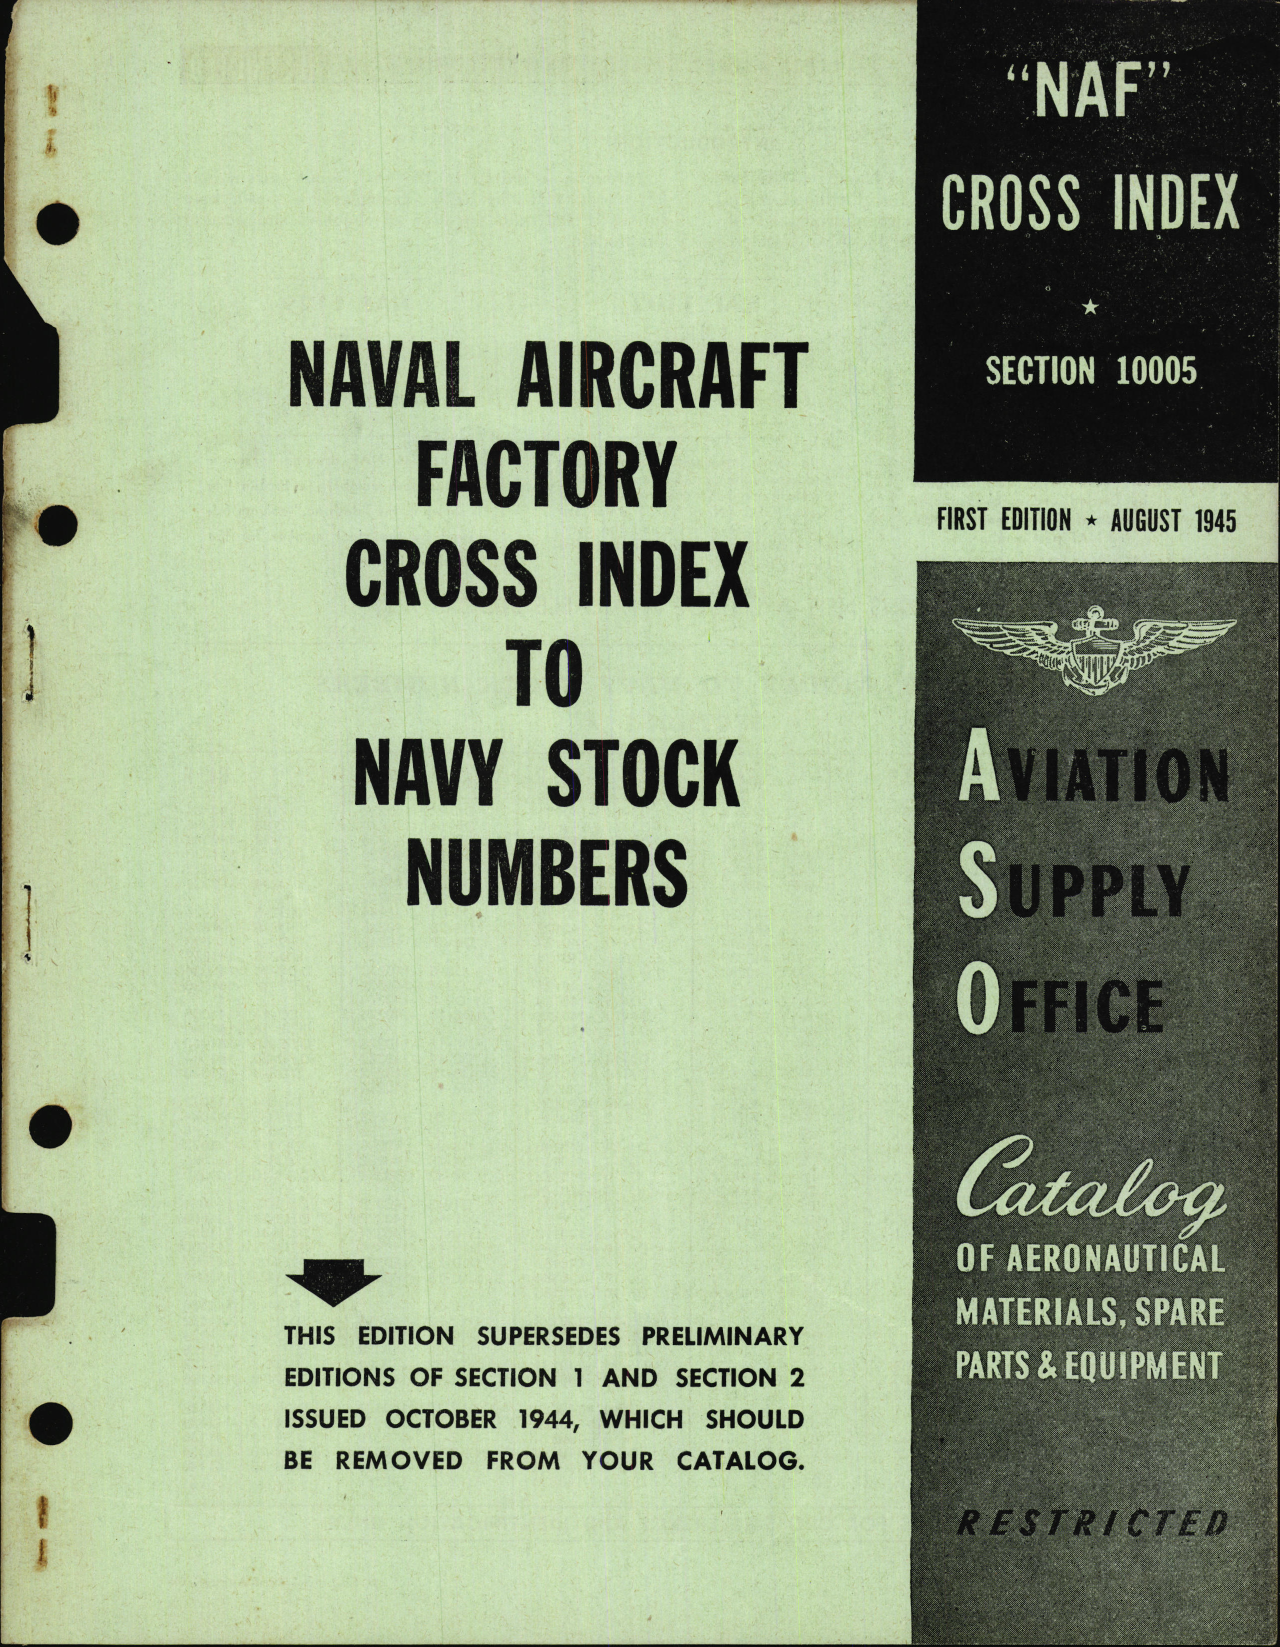 Sample page 1 from AirCorps Library document: Naval Aircraft Factory Cross Index to Navy Stock Numbers